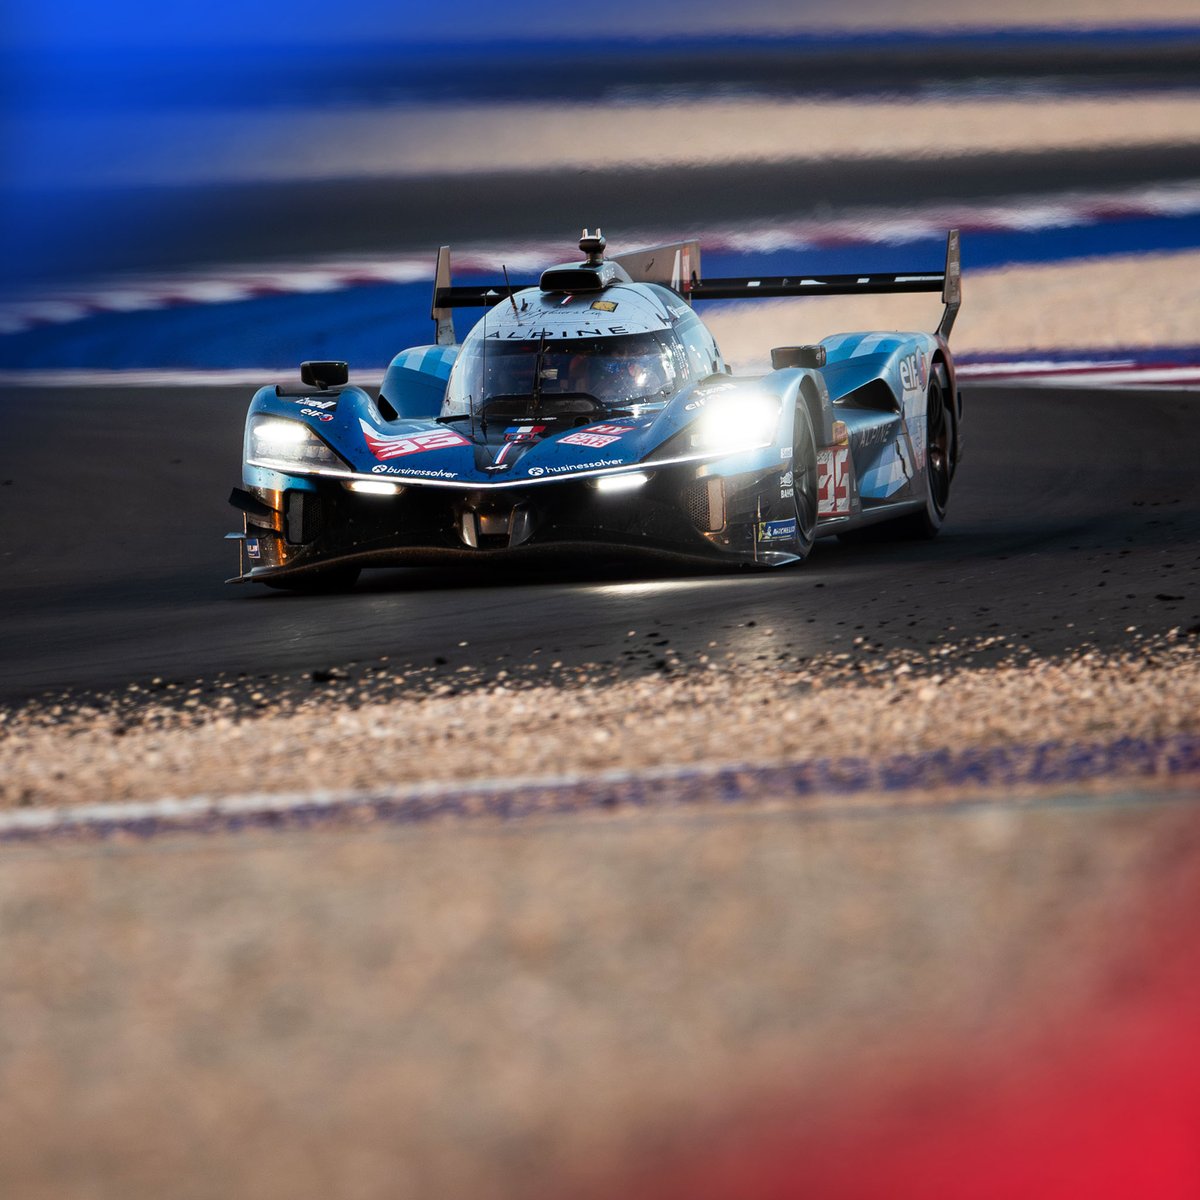 In 1️⃣5️⃣ days the gorgeous Alpine A424 will hit the track again for the 2nd round of the 2024 FIA #WEC season in Imola 🇮🇹! We can't wait! 🔥 #Elf #Endurance @AlpineRacing